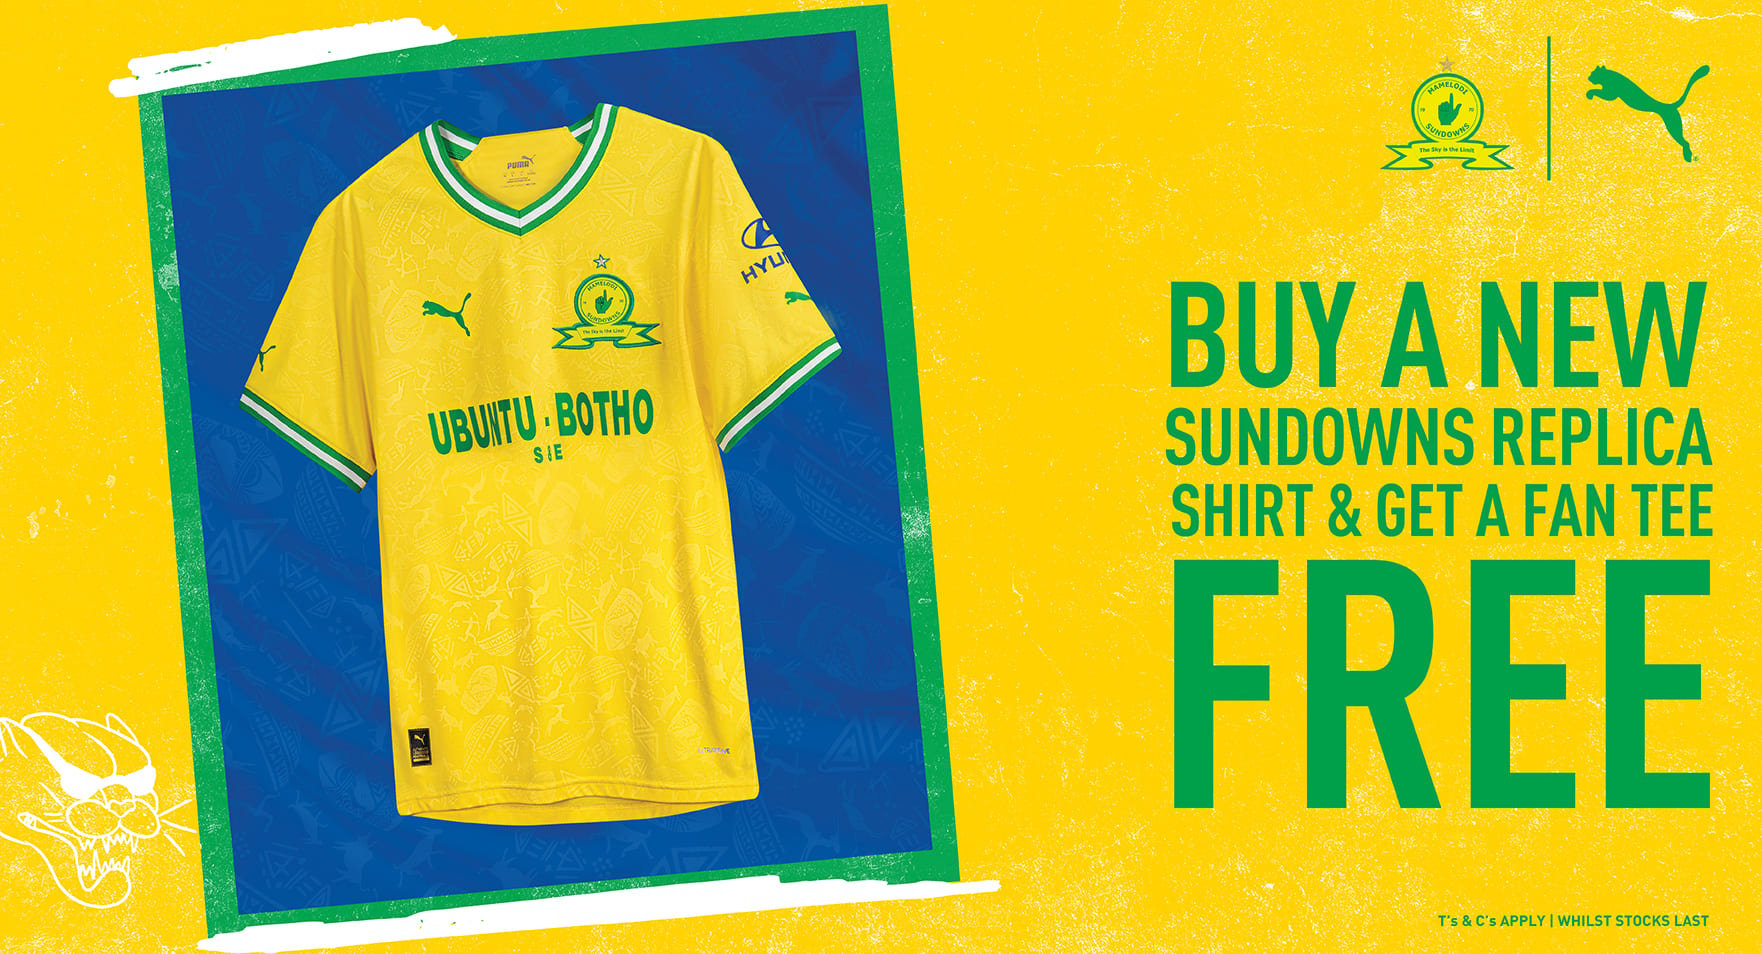 Rise To The Occasion With Studio 88 & Mamelodi Sundowns!